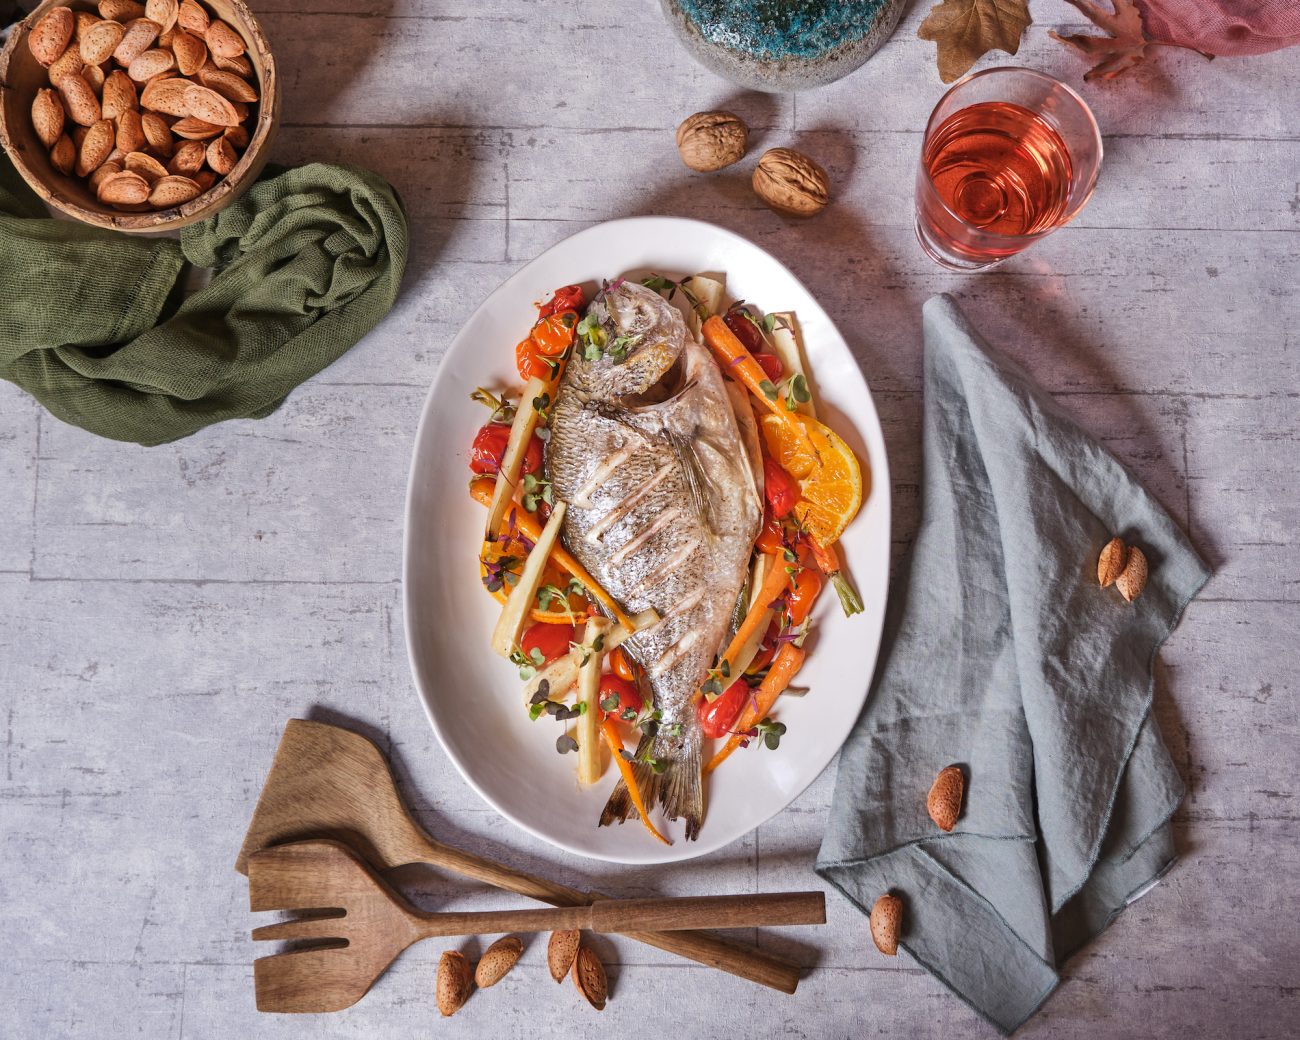 Baked Sea Bream marinated with Sage and Orange served with Parsnips, Cherry Tomatoes and Carrots